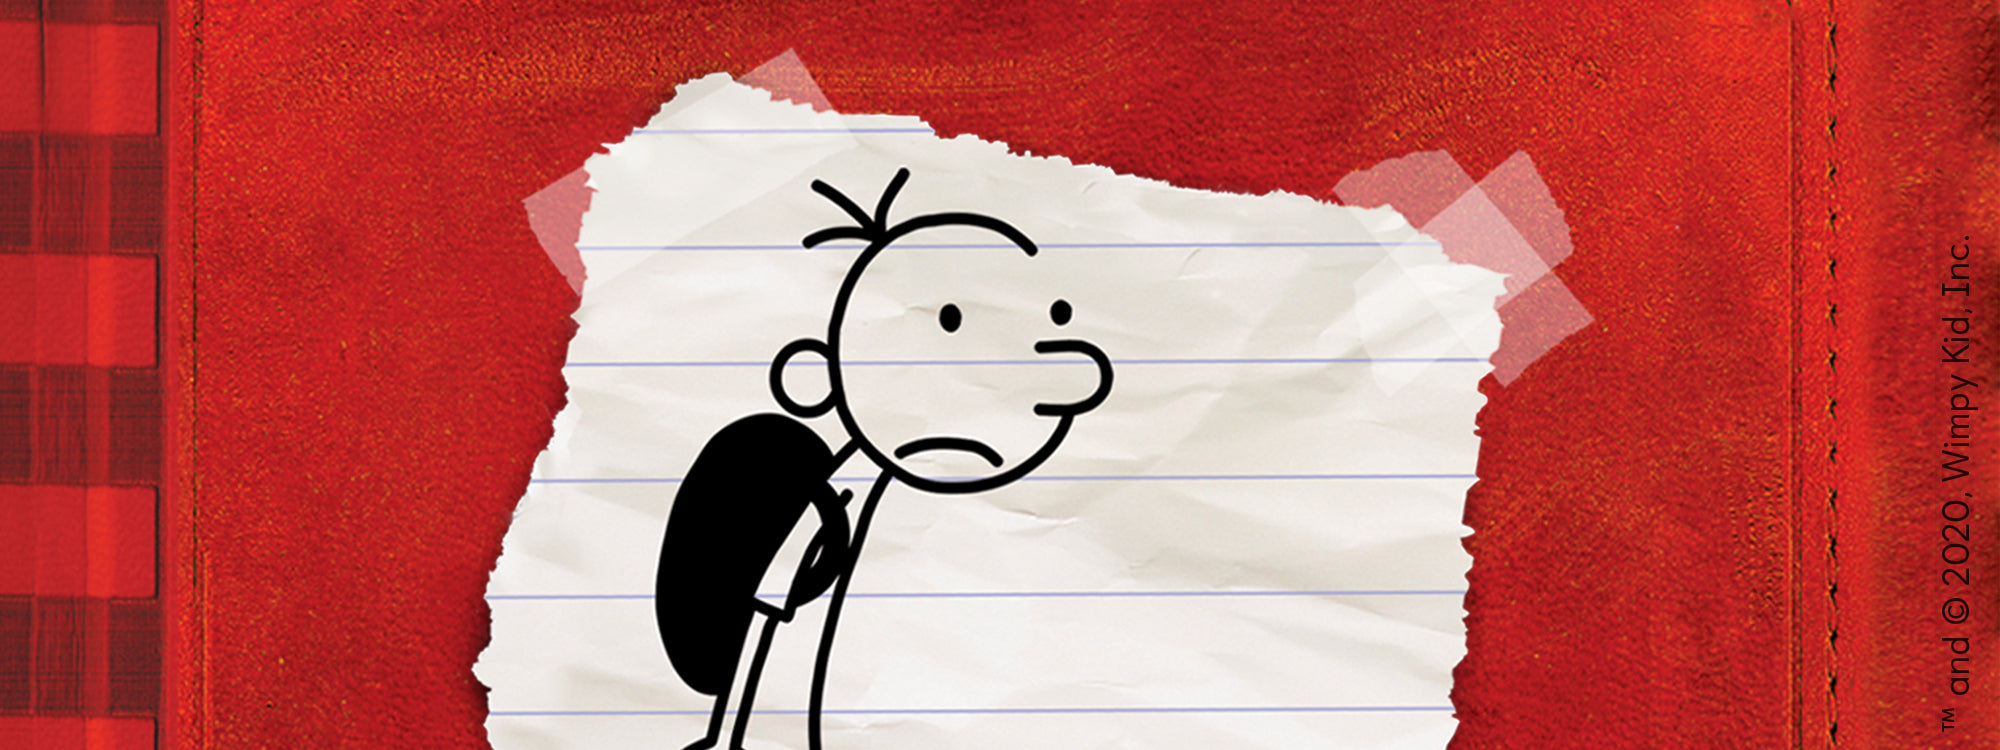 Interview with Jeff Kinney - Author of Diary of a Wimpy Kid!